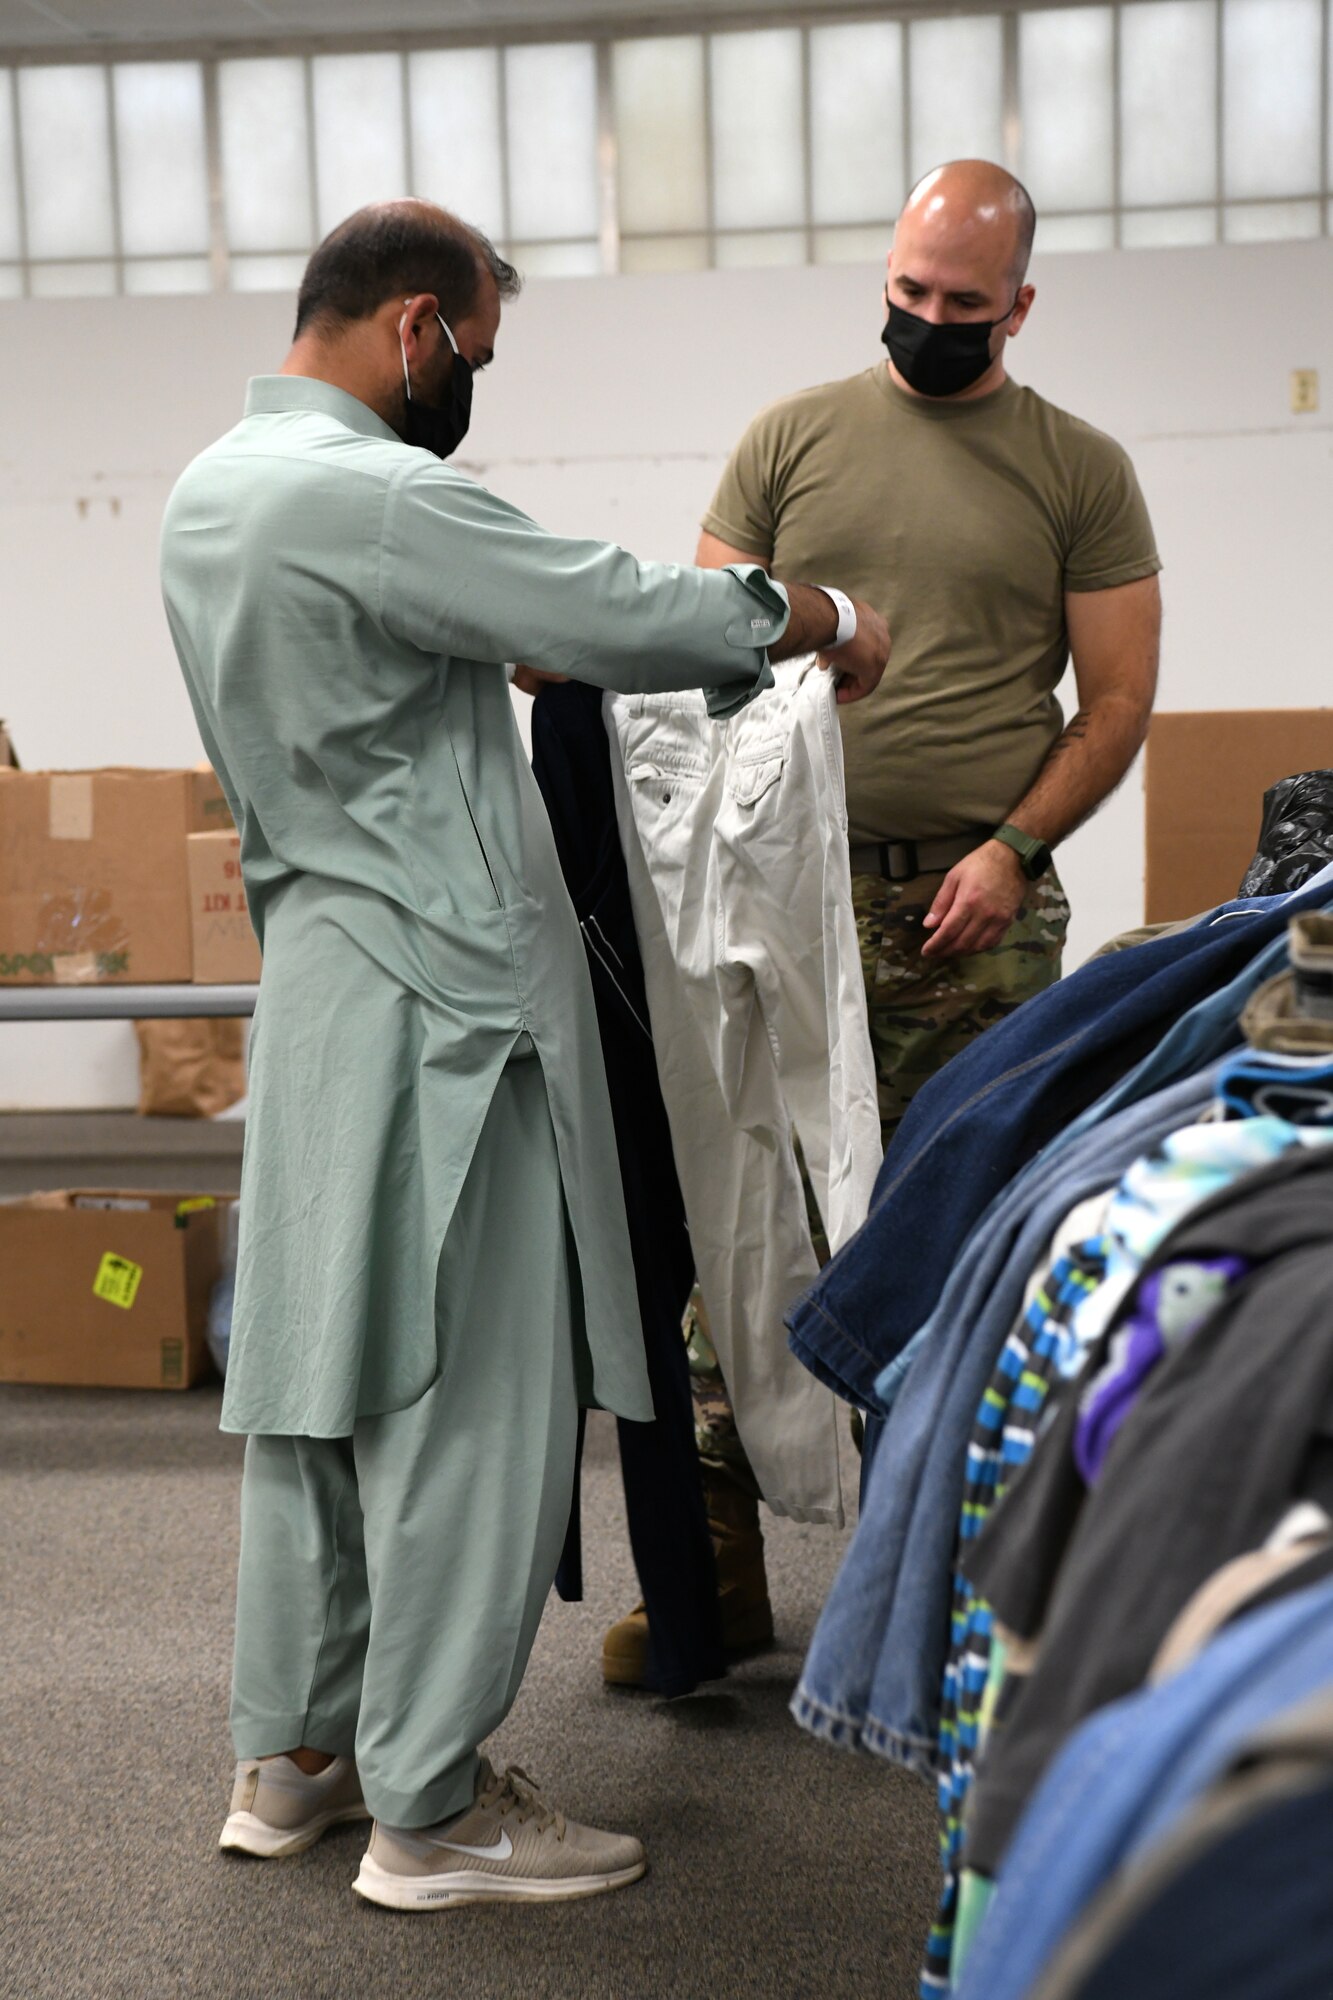 Image of an Airman showing another person clothes.